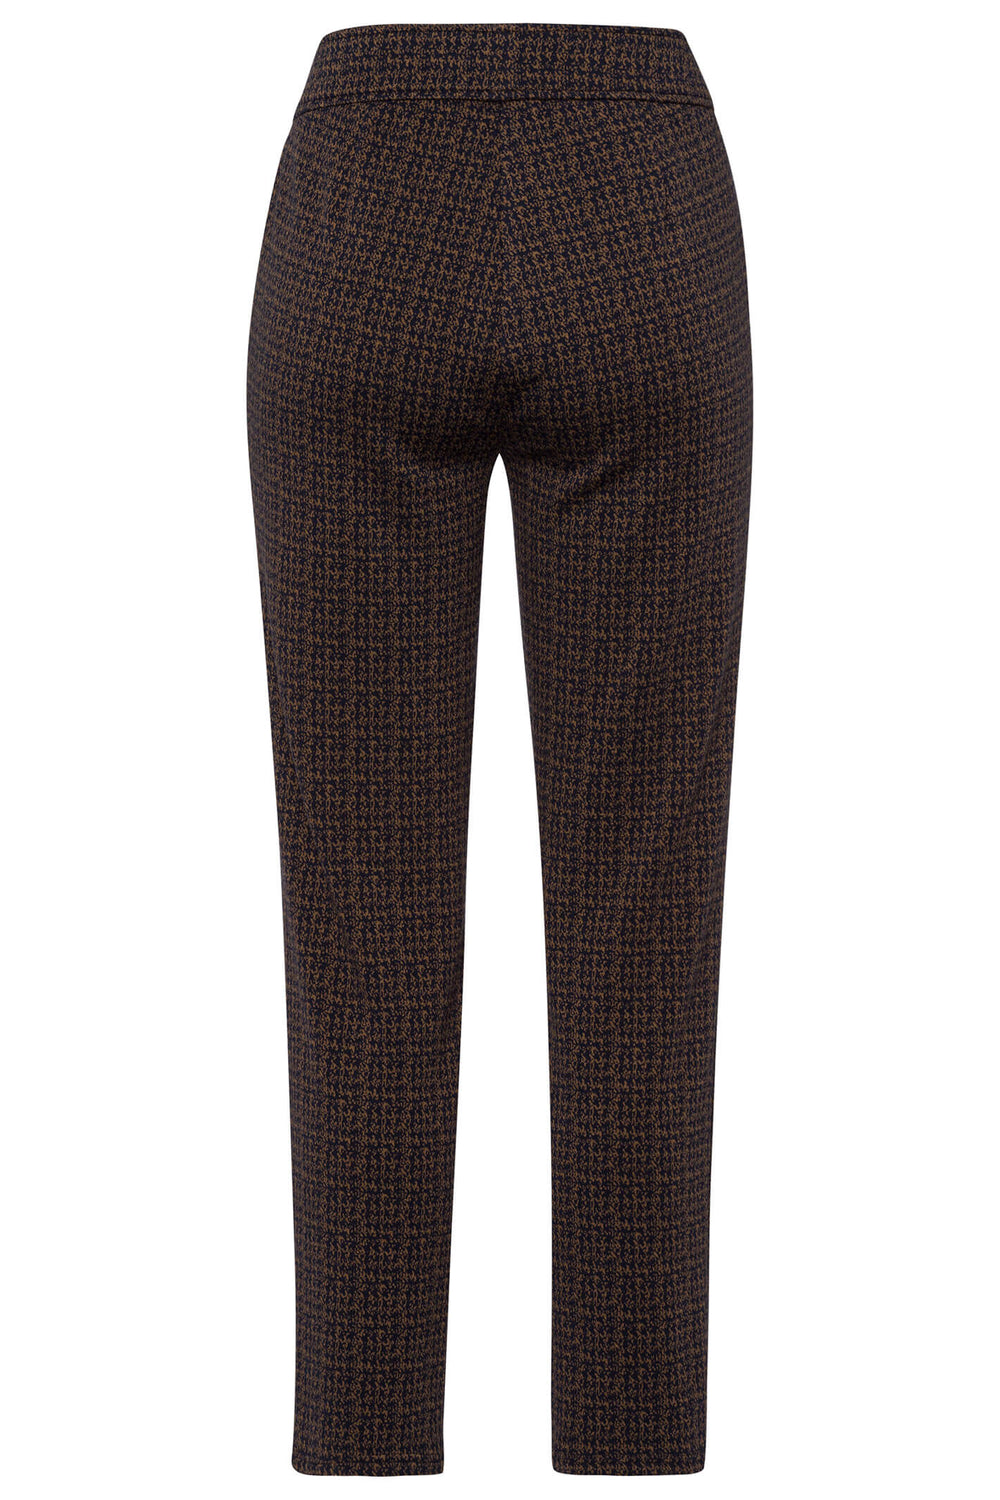 Frank Walder 309601 022 087 Brown Dogtooth Pull-On Trousers - Shirley Allum Boutique